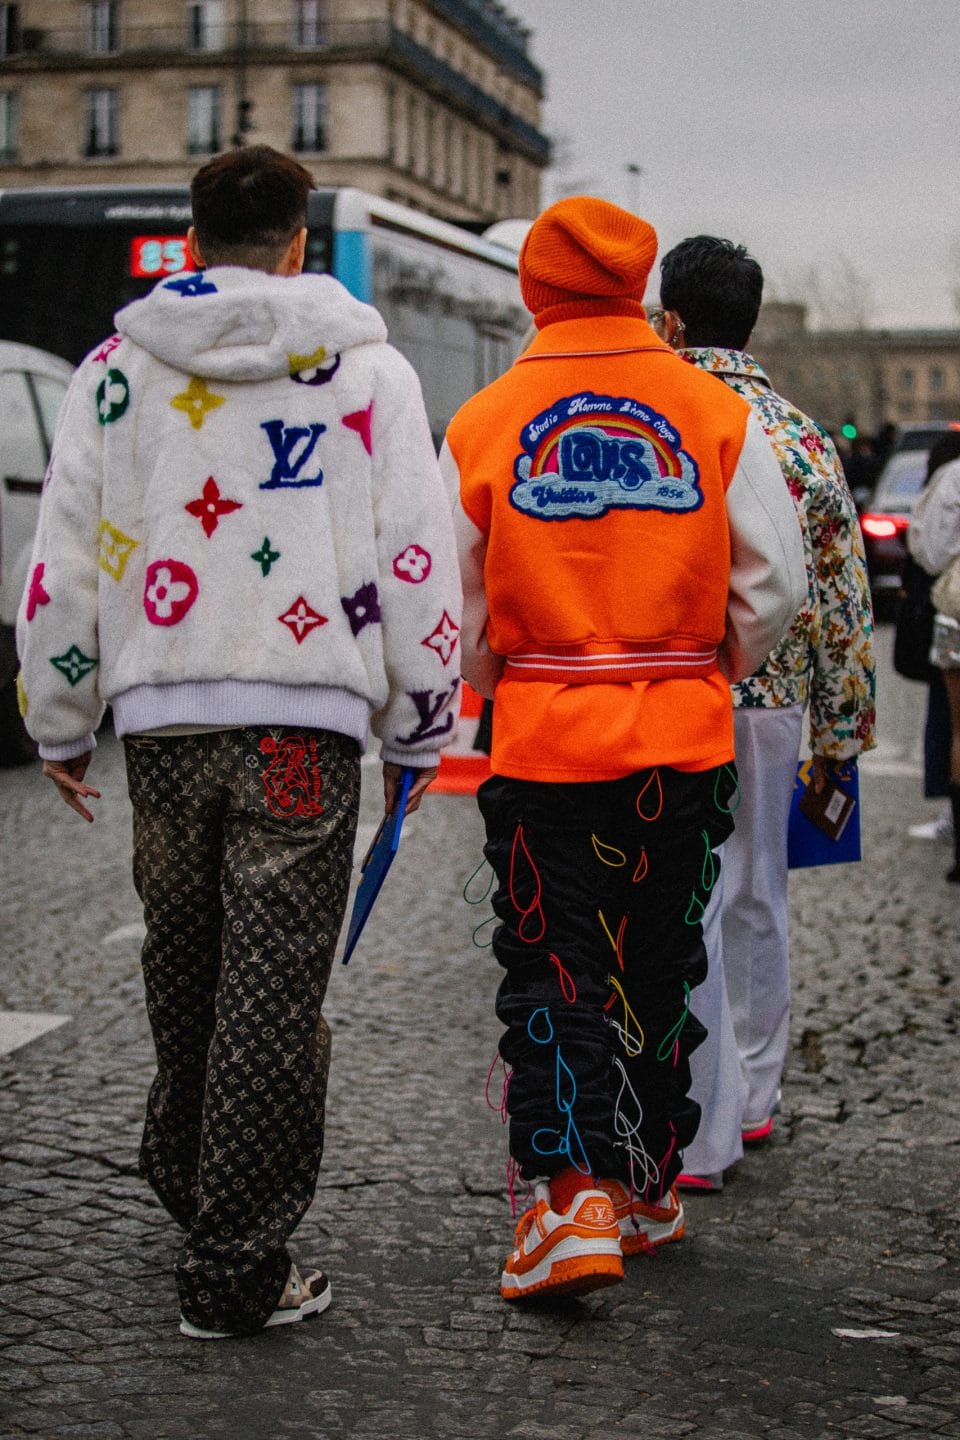 The Best Street Style Looks From Paris FW23 Menswear Shows